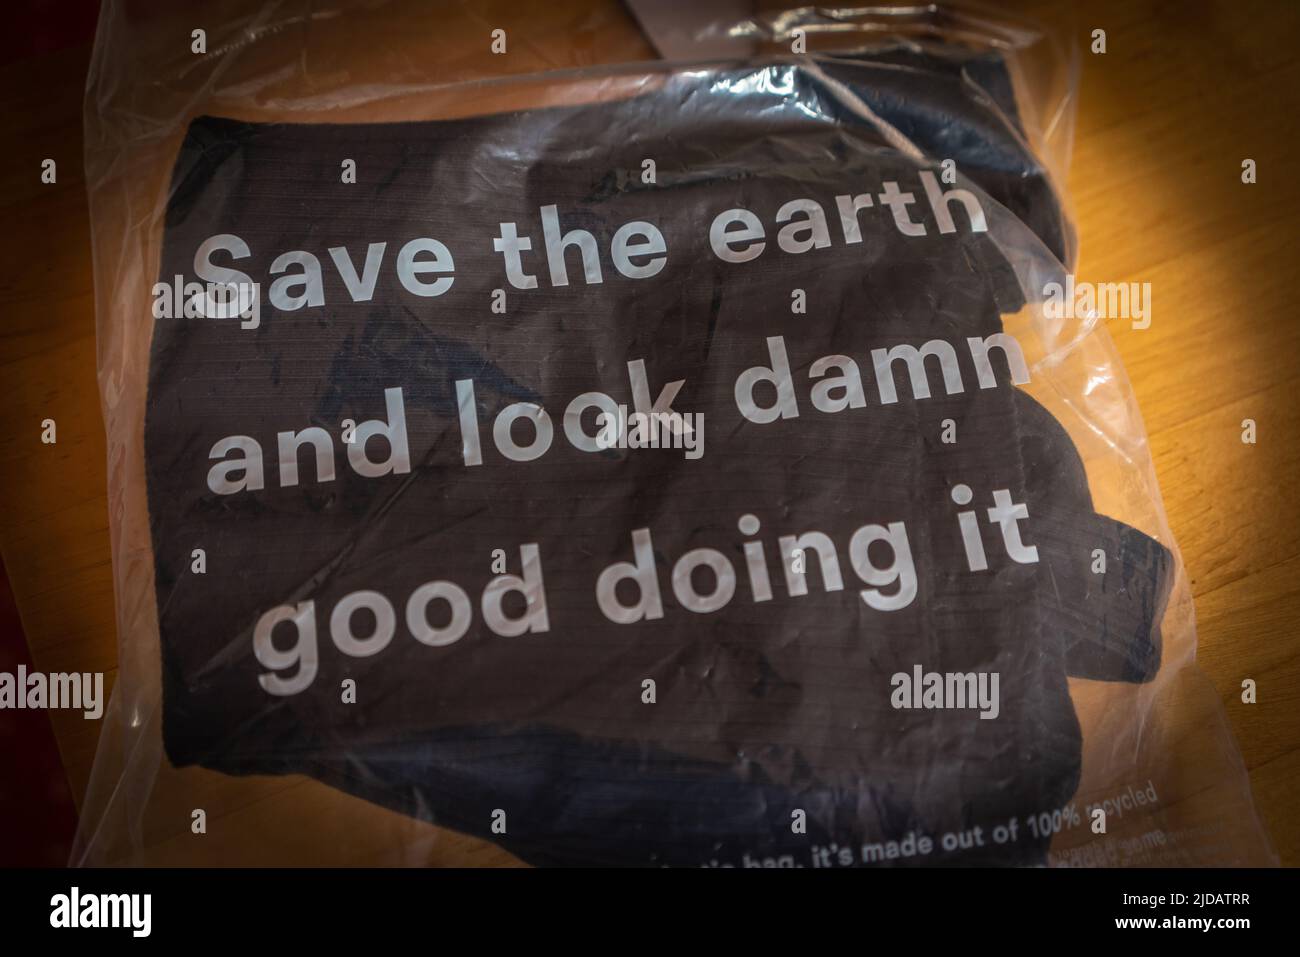 Sustainable environmentally friendly clothing made by Reformation - an American fashion retailer, 'Save the earth and look damn good doing it' packaging Stock Photo